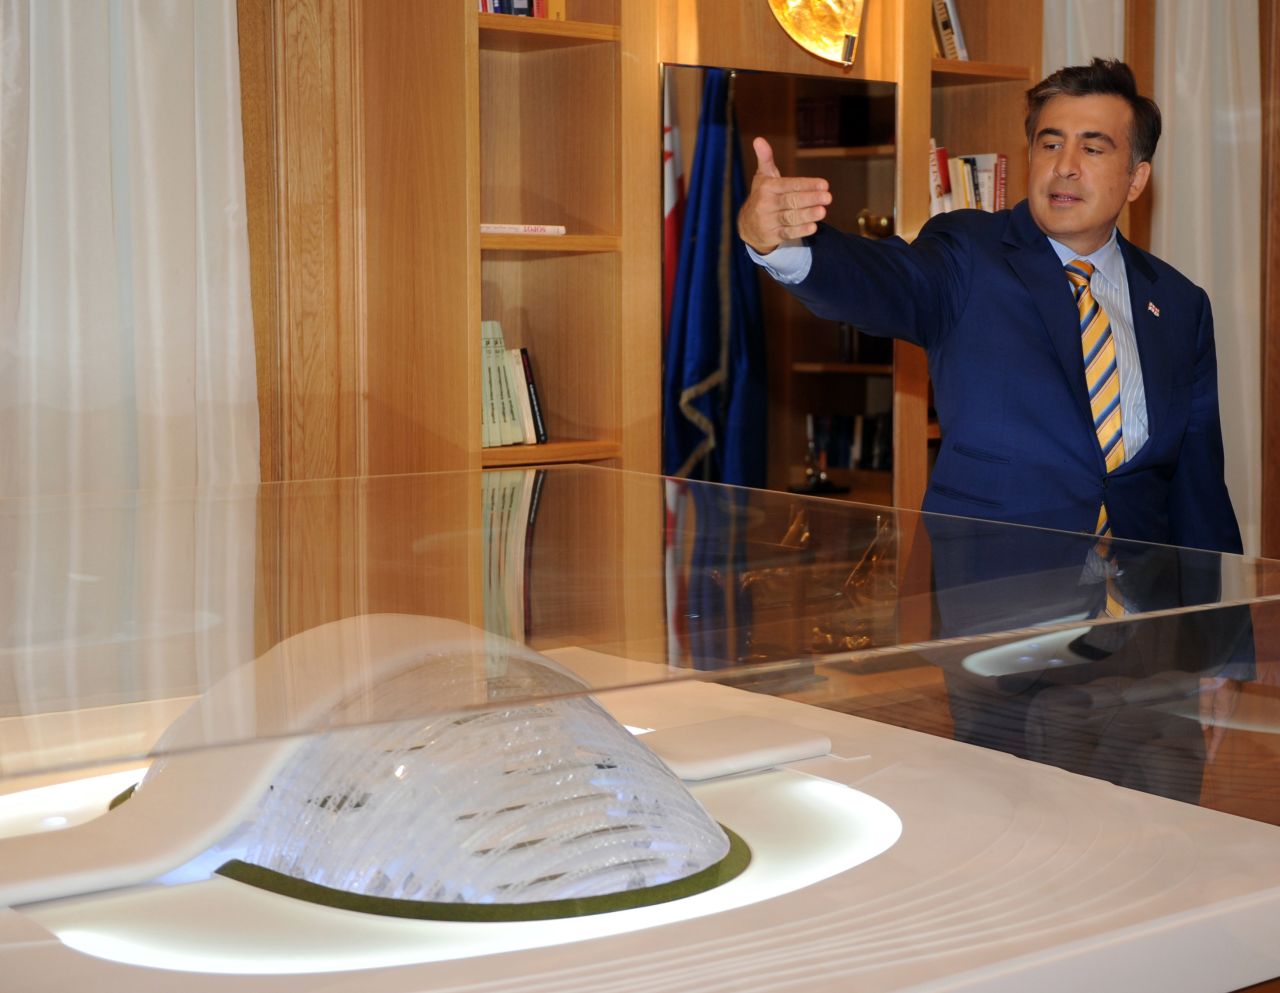 President Saakashvili is a vocal supporter of the new building, but a report from the Georgian Young Lawyers' Association has criticized the opacity of its funding. 